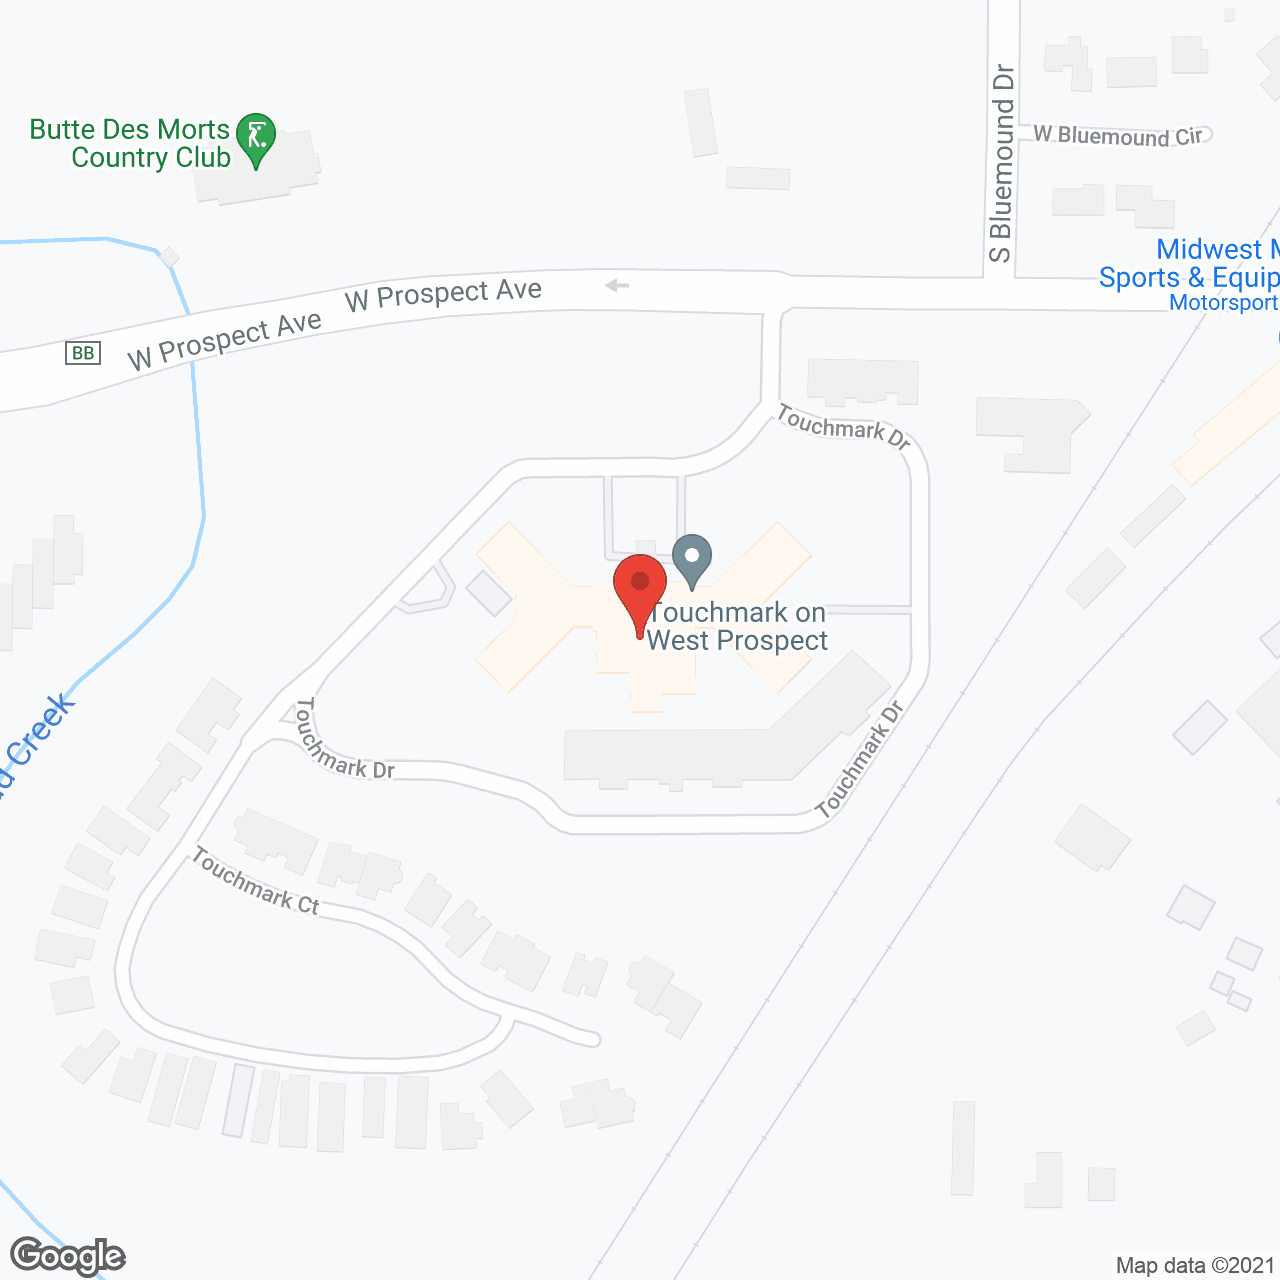 Touchmark on West Prospect in google map